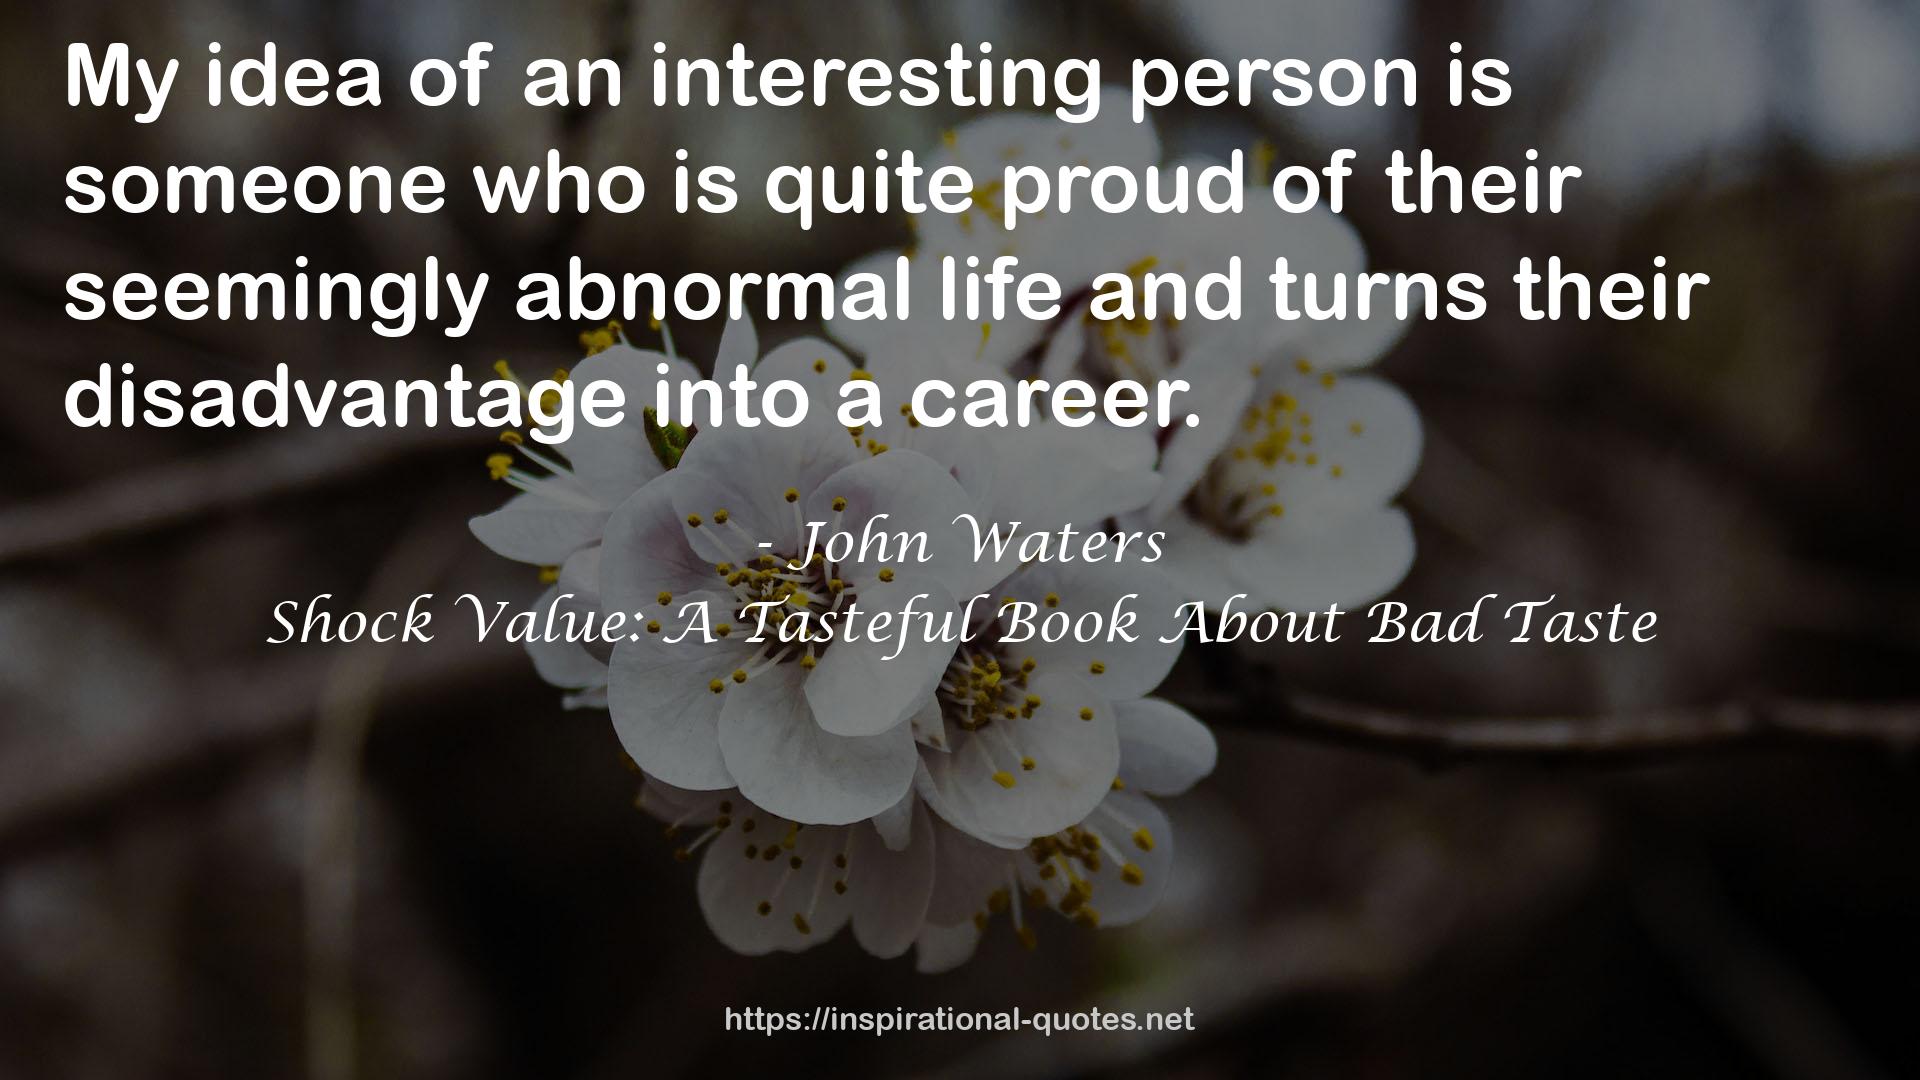 John Waters QUOTES